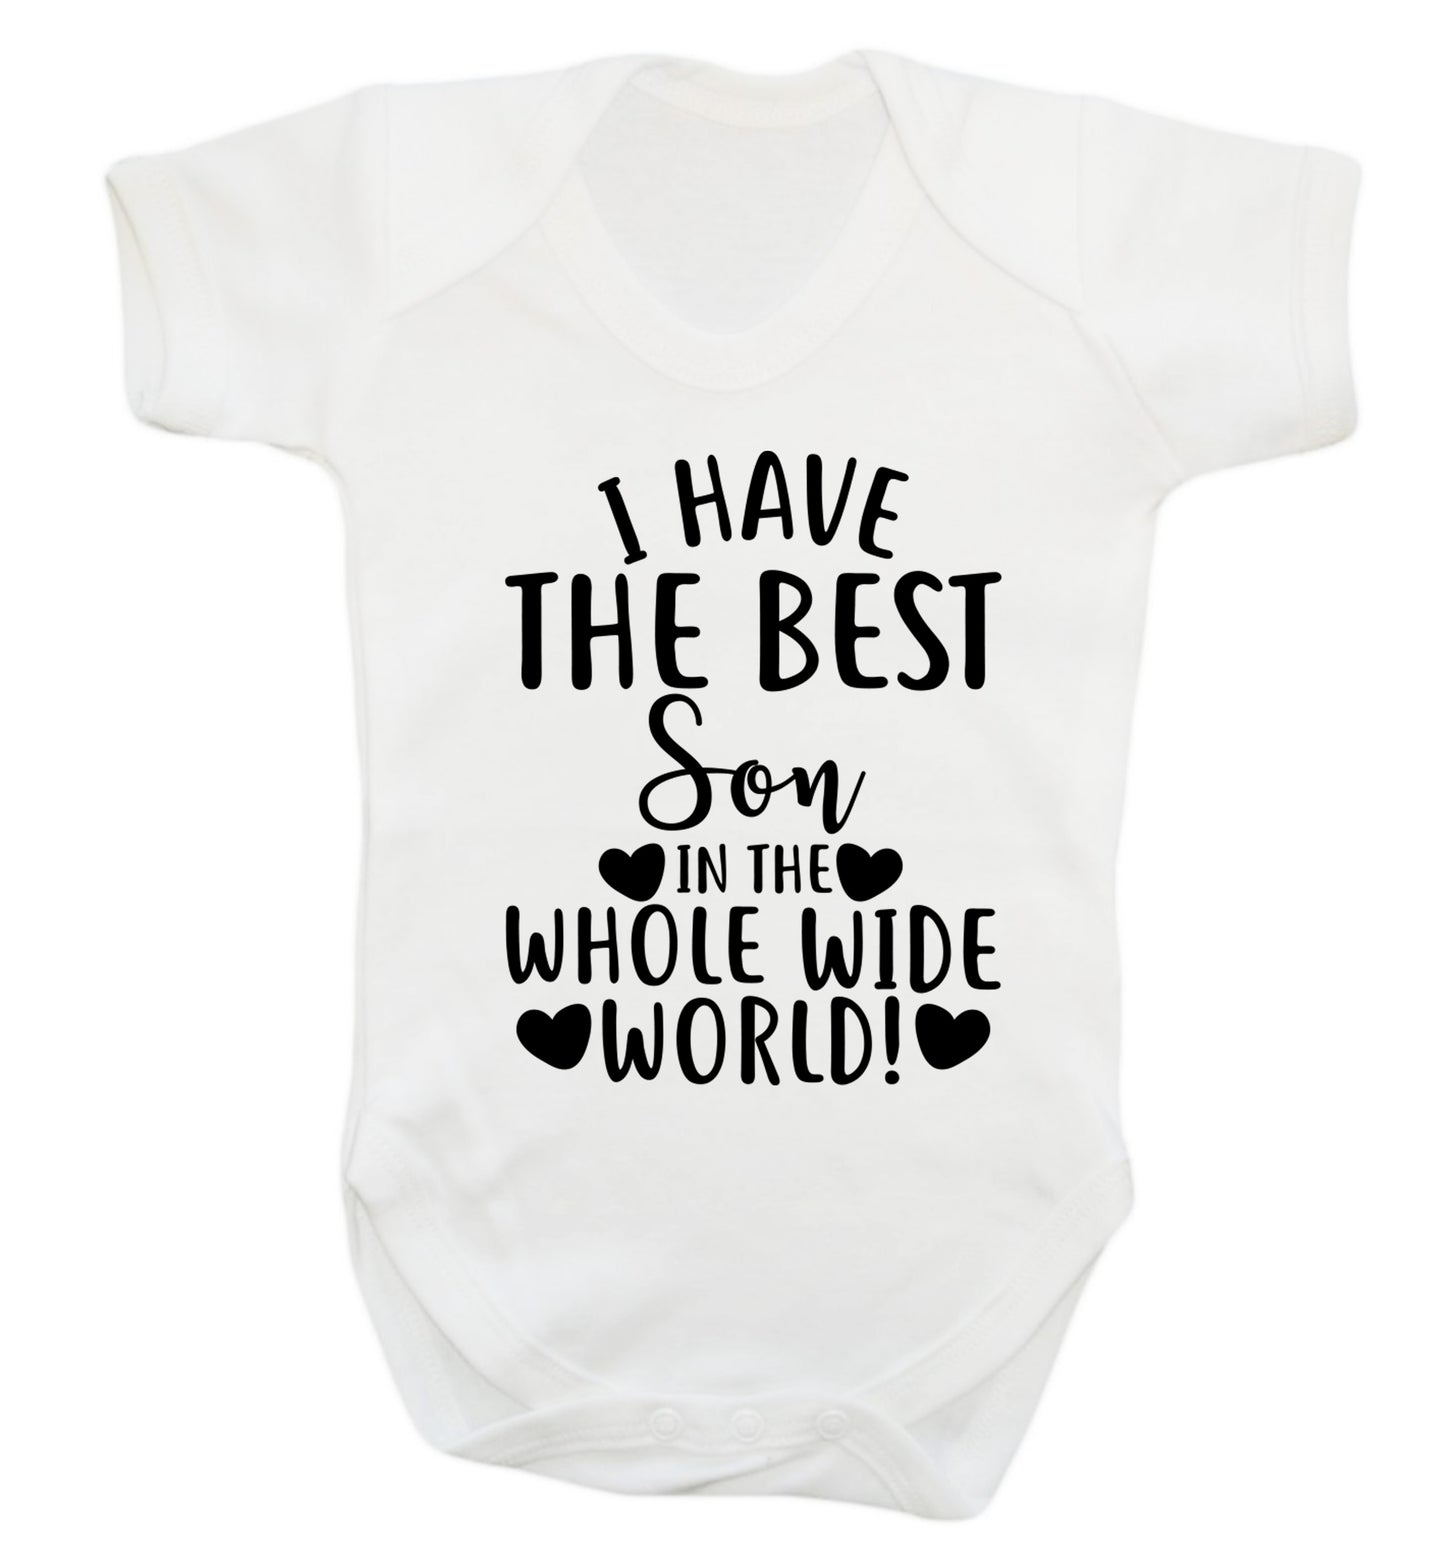 I have the best son in the whole wide world! Baby Vest white 18-24 months